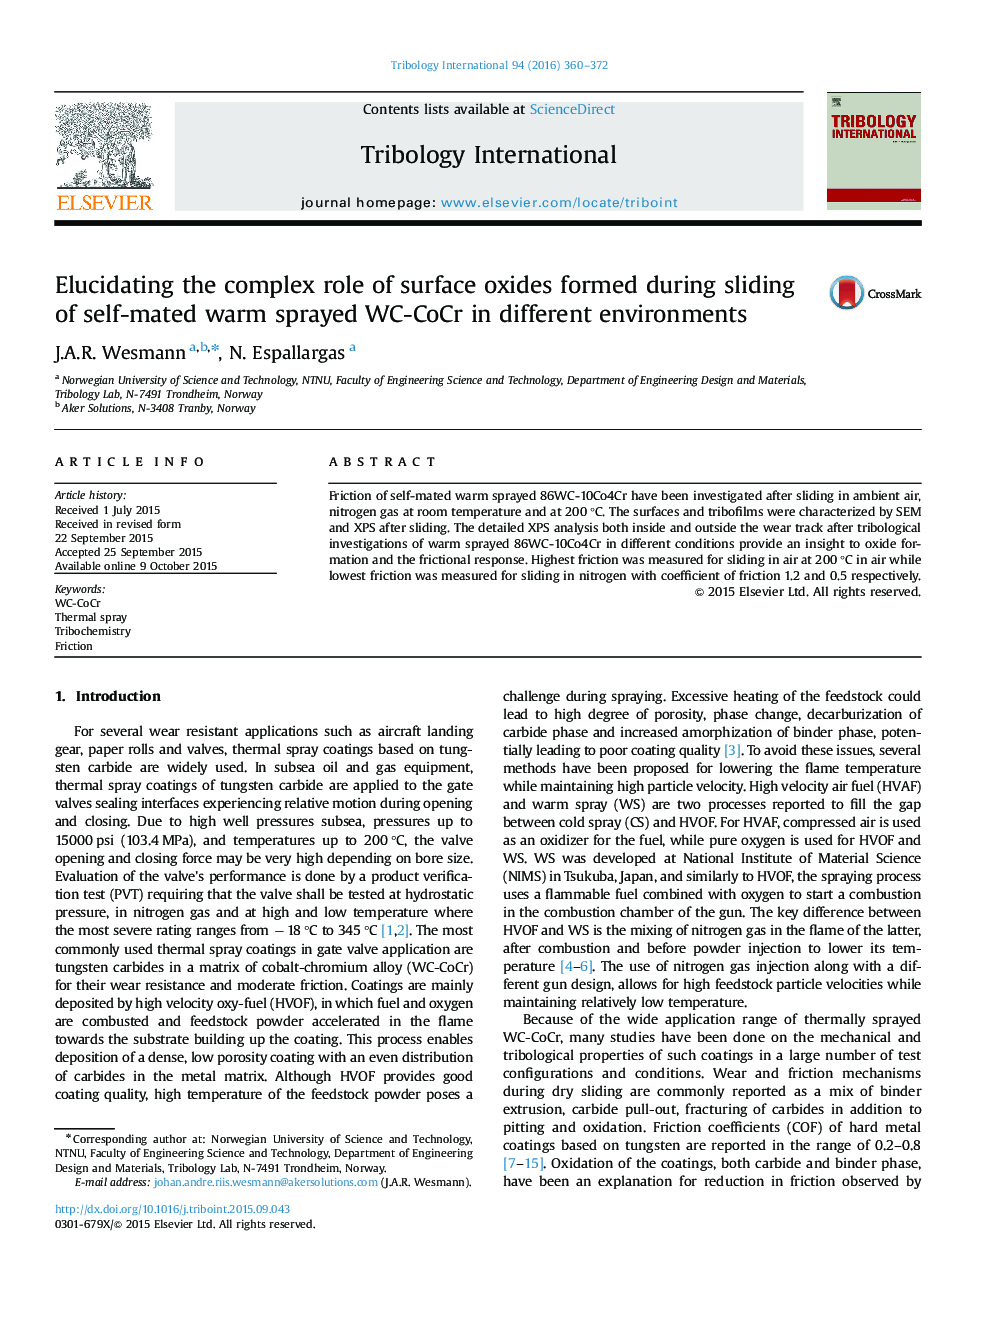 Elucidating the complex role of surface oxides formed during sliding of self-mated warm sprayed WC-CoCr in different environments